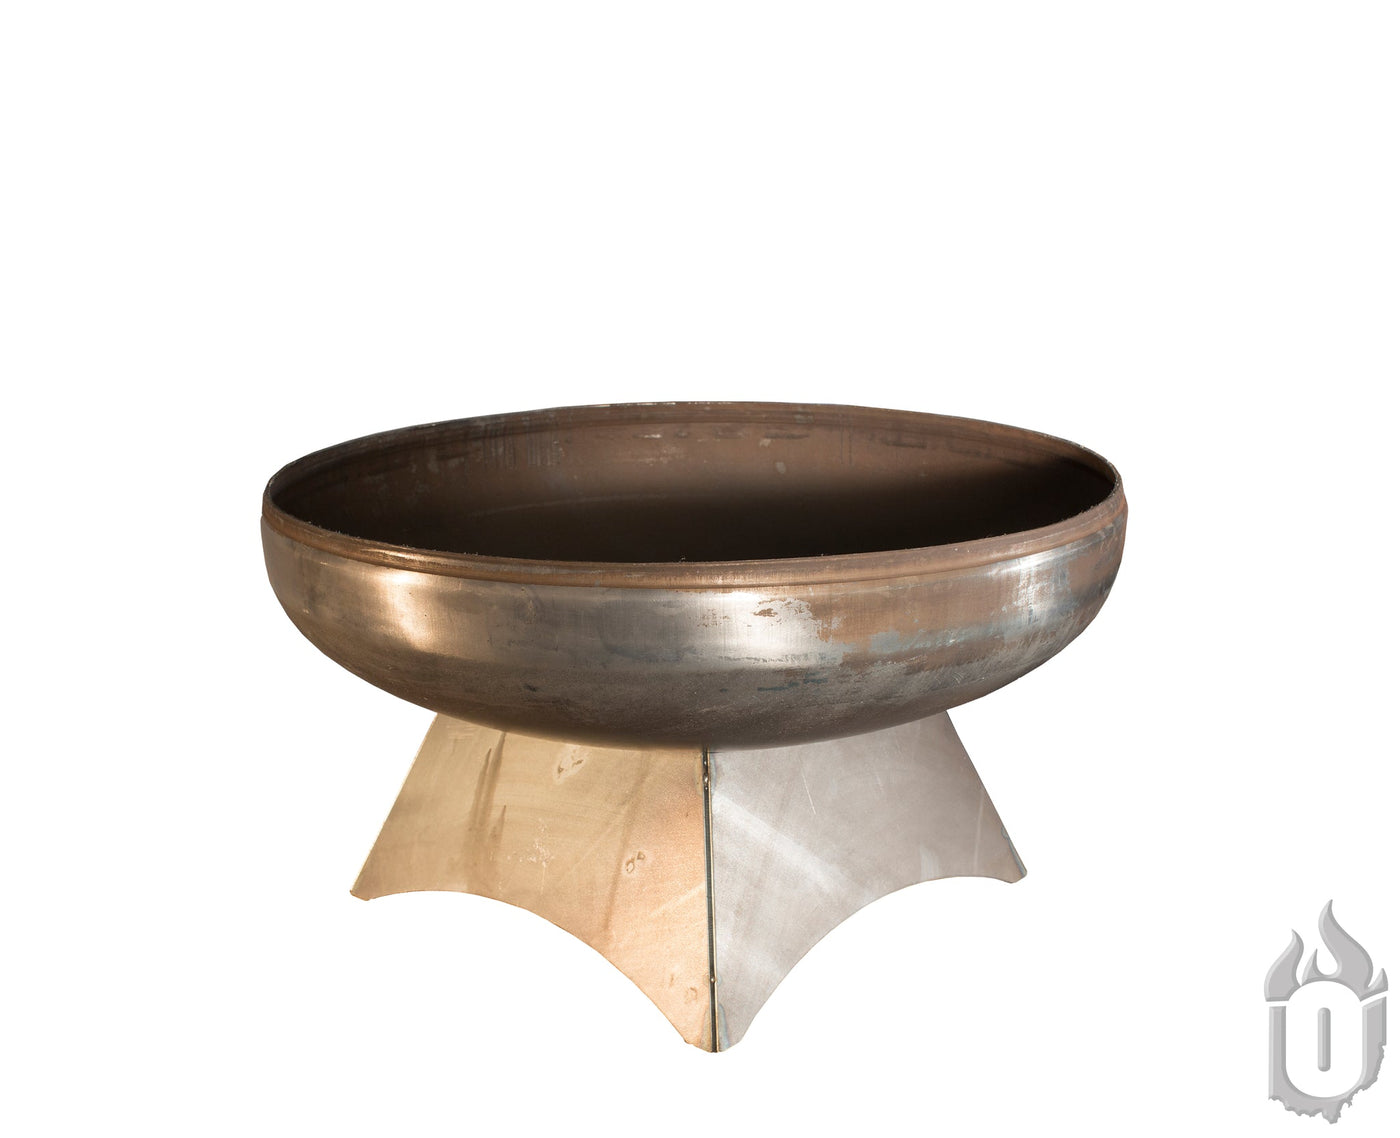 Ohioflame Liberty Fire Pit with Standard Base- OFLTYSB